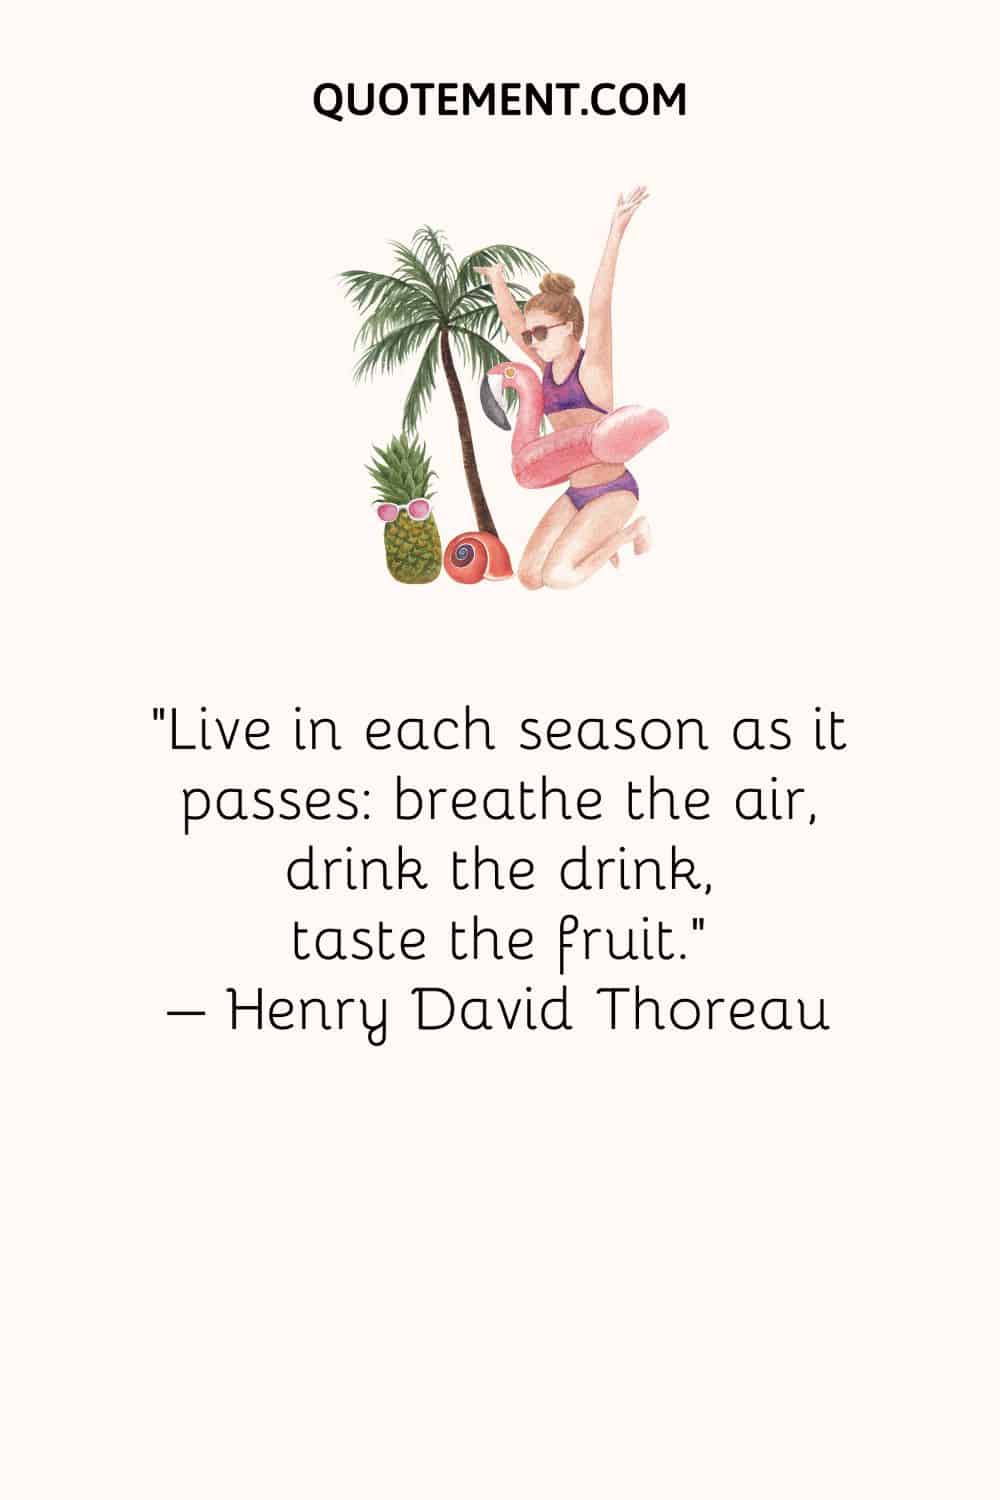 Live in each season as it passes breathe the air, drink the drink, taste the fruit. – Henry David Thoreau